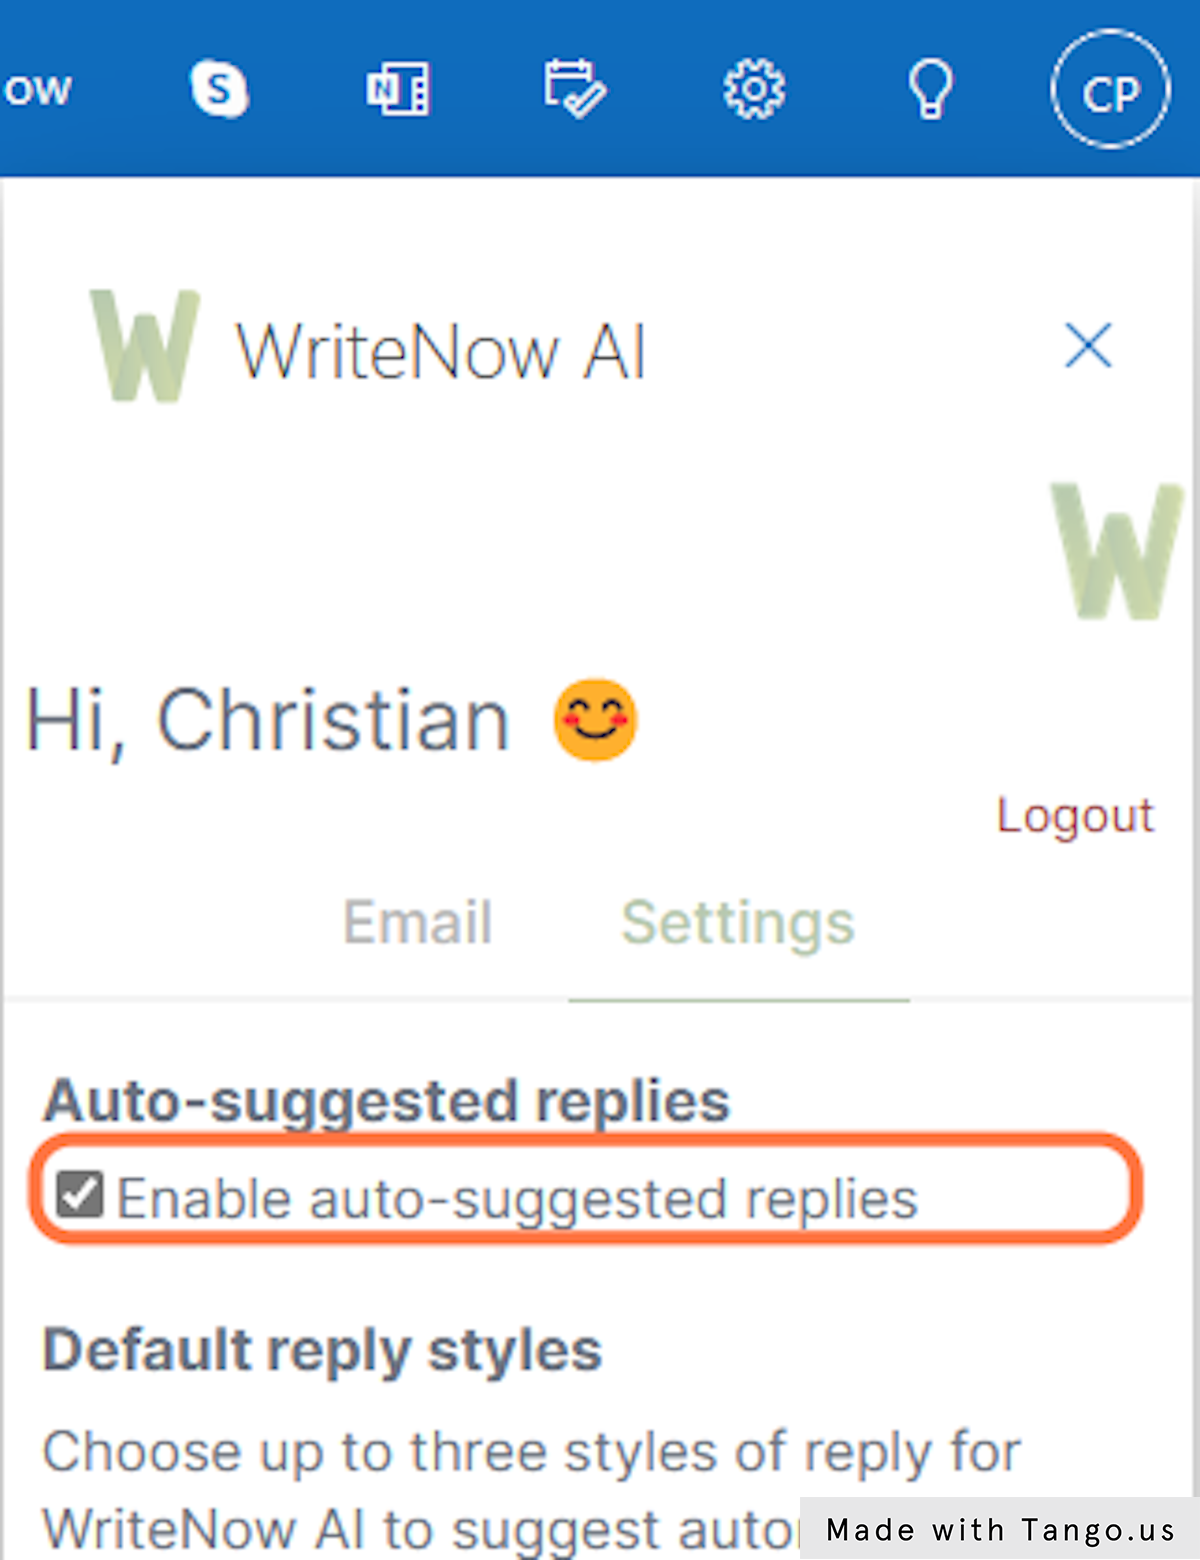 By default auto-suggest replies is turned on. You can turn this off if you are not using this feature.